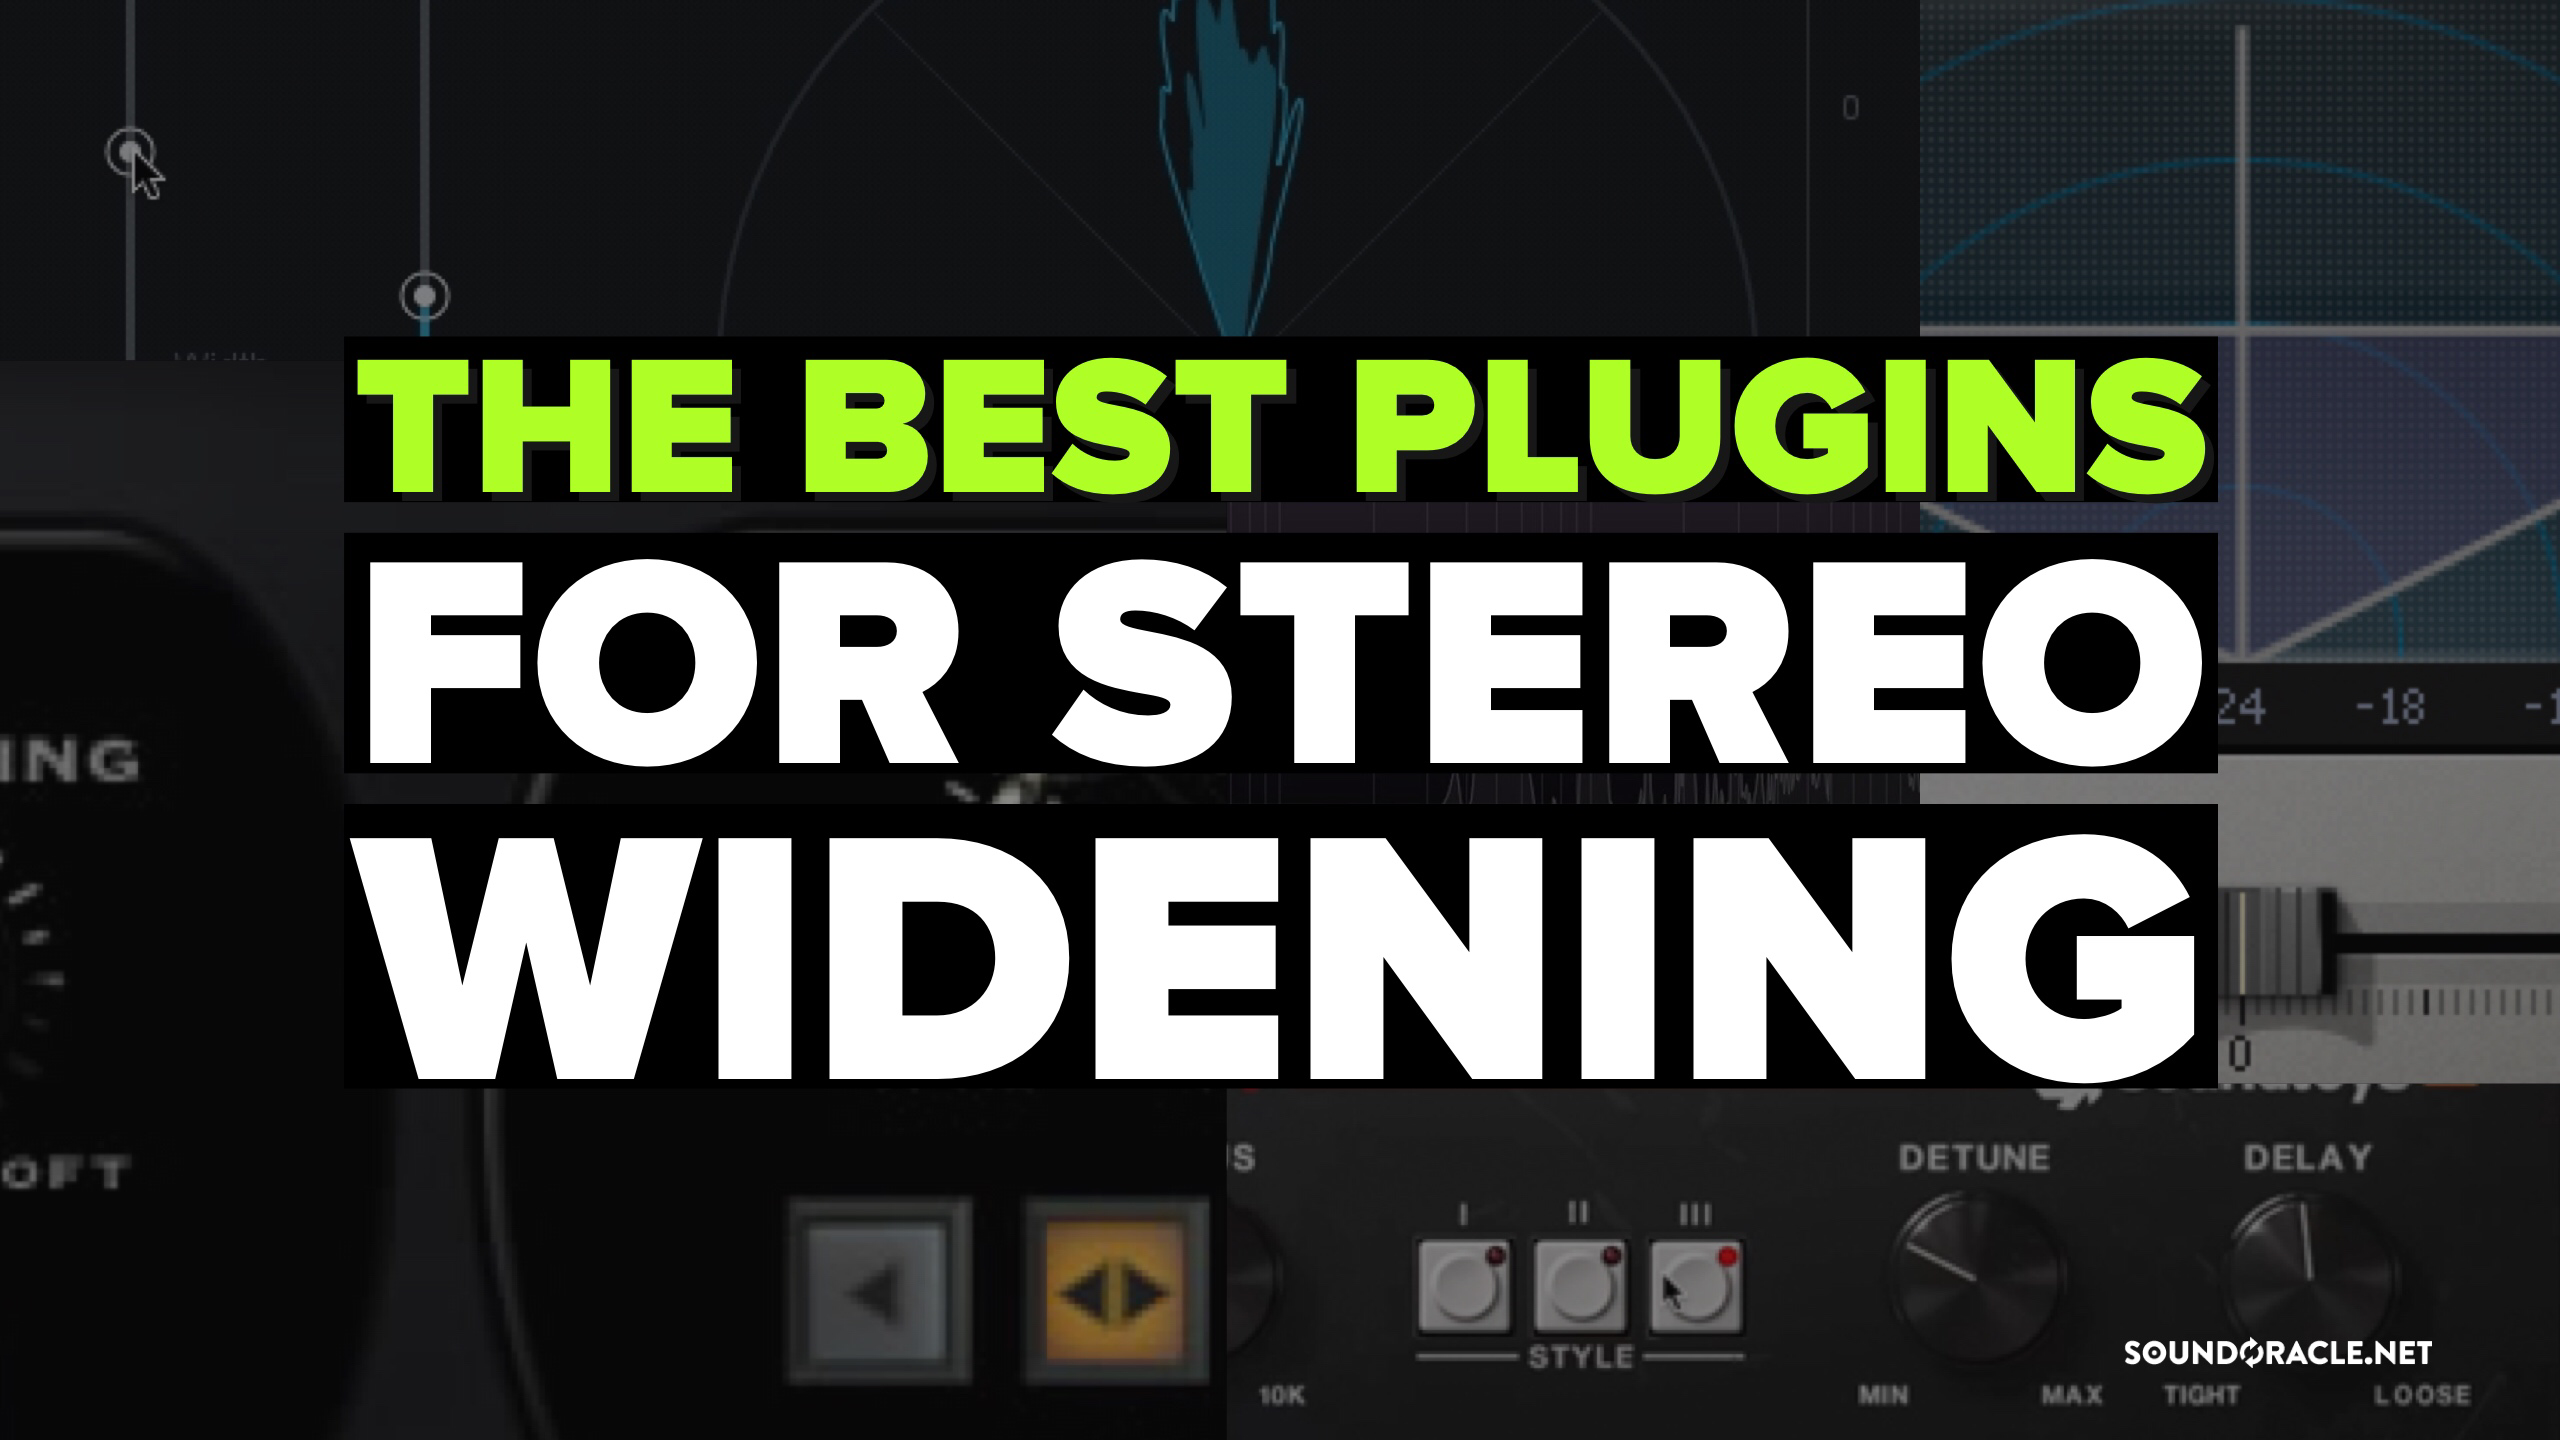 The Best Plugins For Stereo Widening | Tutorial Video